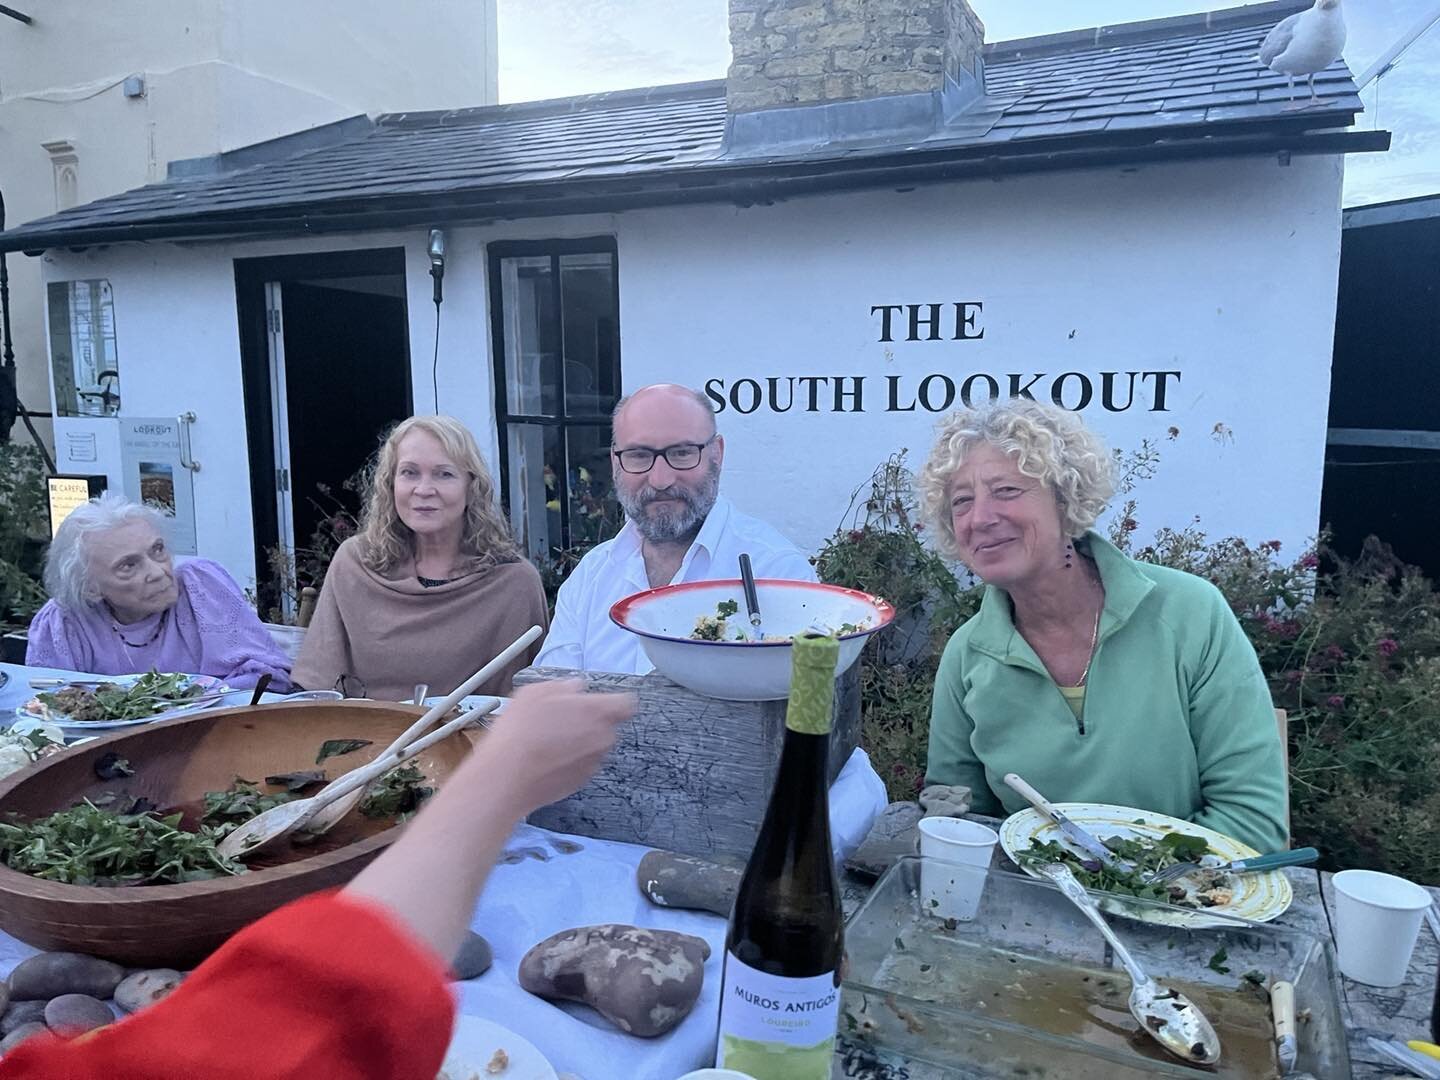 Prof David Berman stays for supper at the Lookout after his riveting talk on Creativity in Science and Working with artists given to members of the Arts Club Aldeburgh Beach last night.